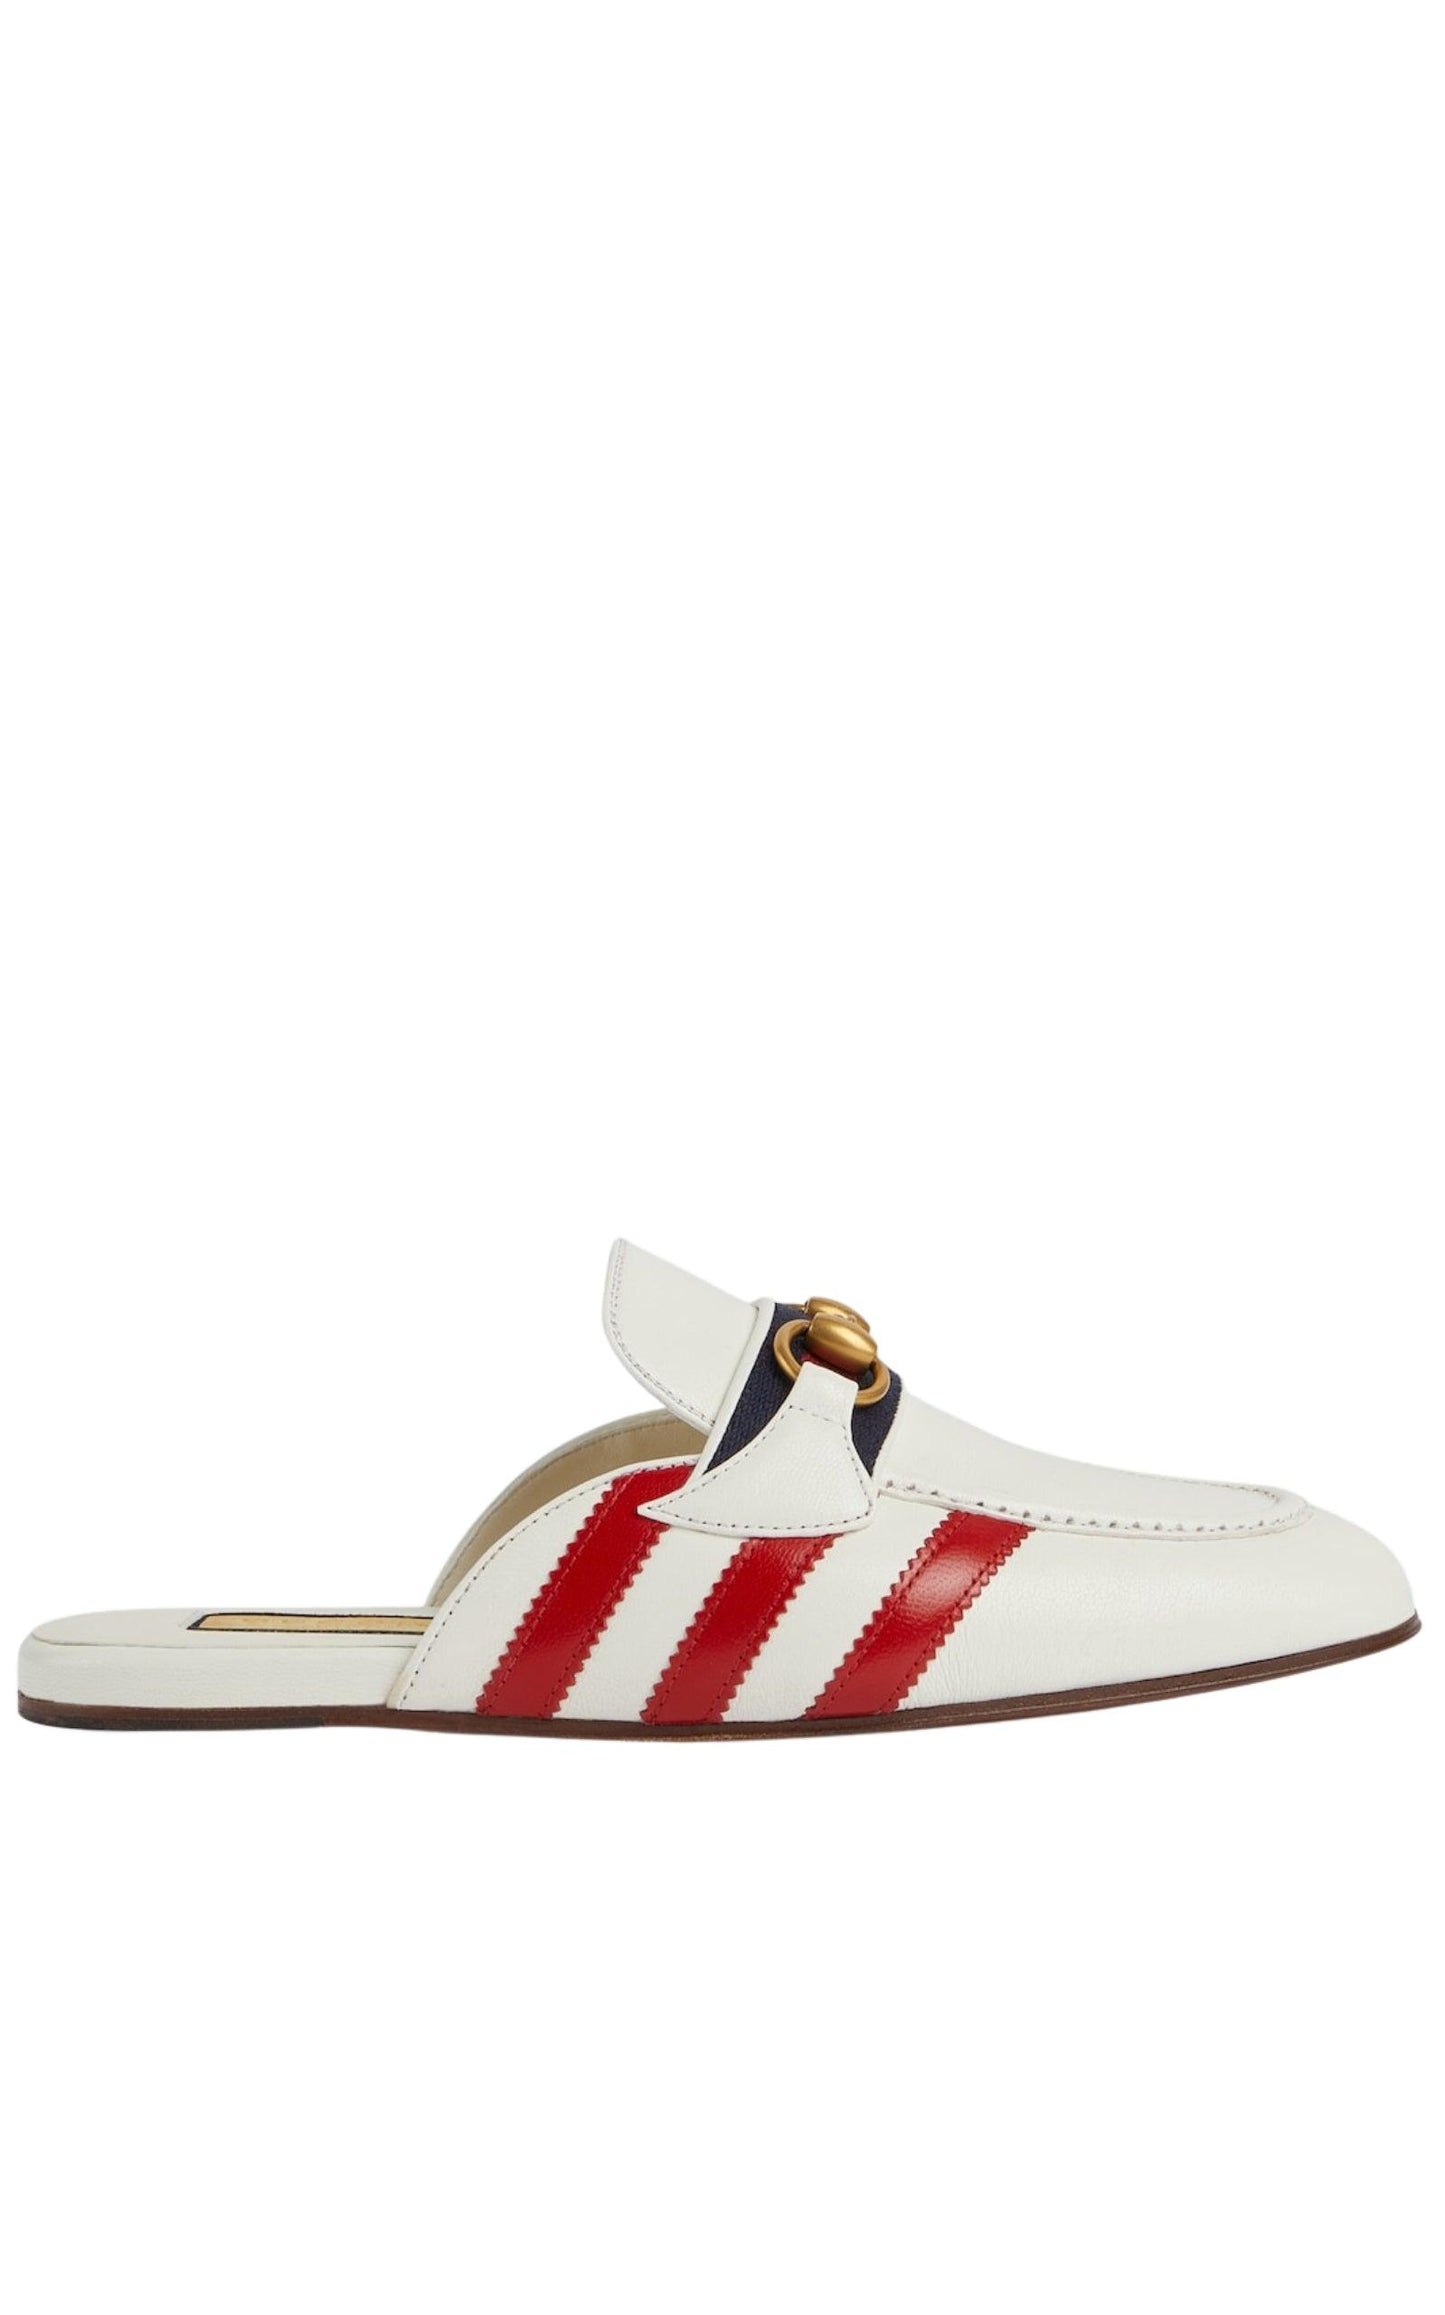 Adidas x Gucci Horsebit Leather Slipper-Loafers-Gucci-IT 36.5-White-Leather-Runway Catalog